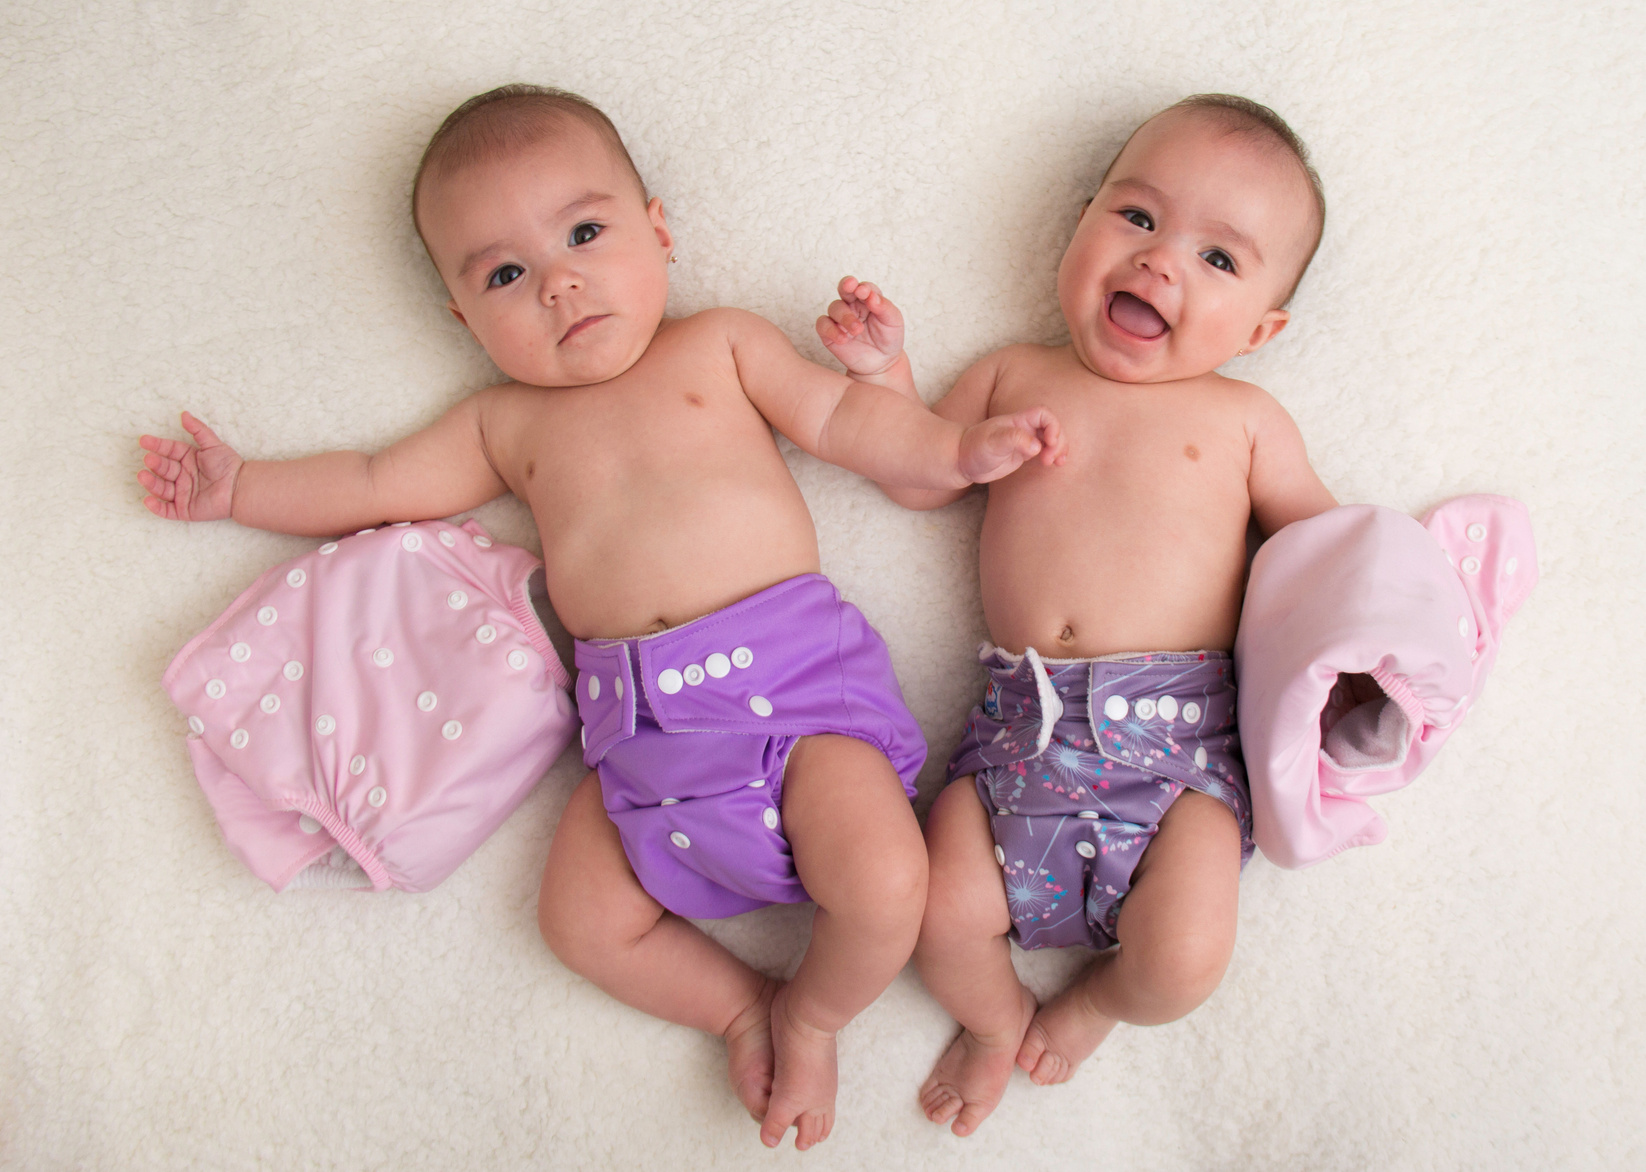 Twin babies girls with ecologic cloth diapers